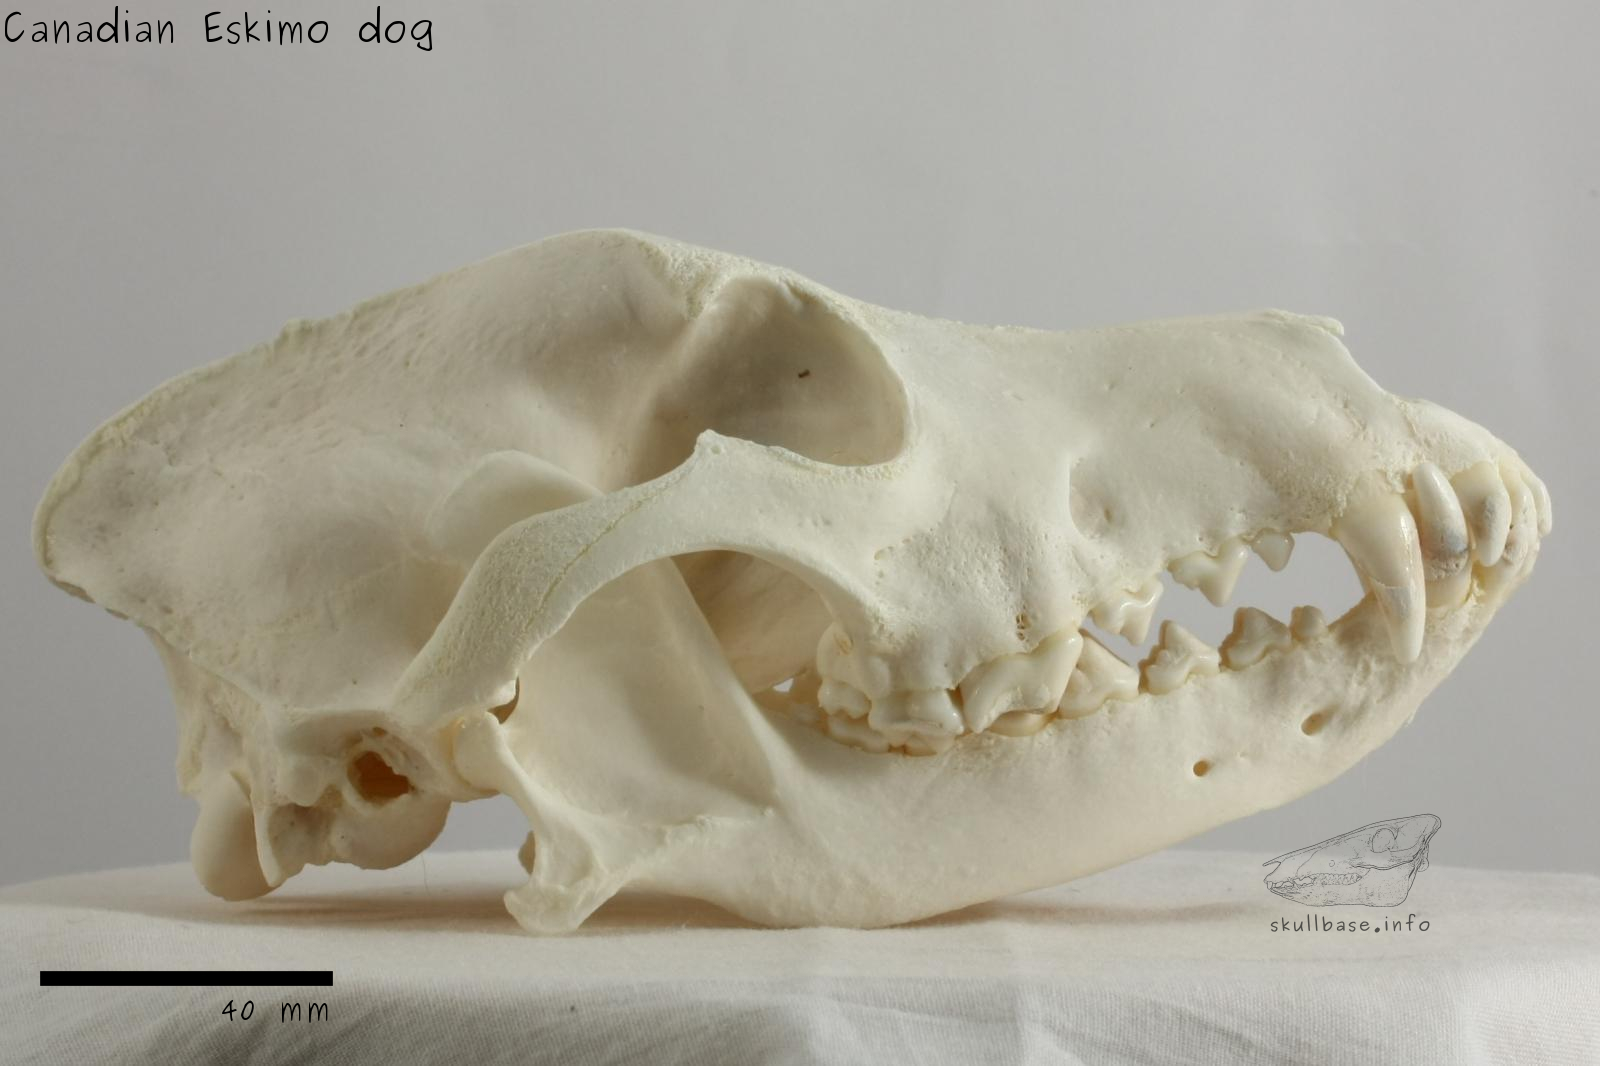 Canadian Eskimo dog (Canis lupus familiaris) skull lateral view